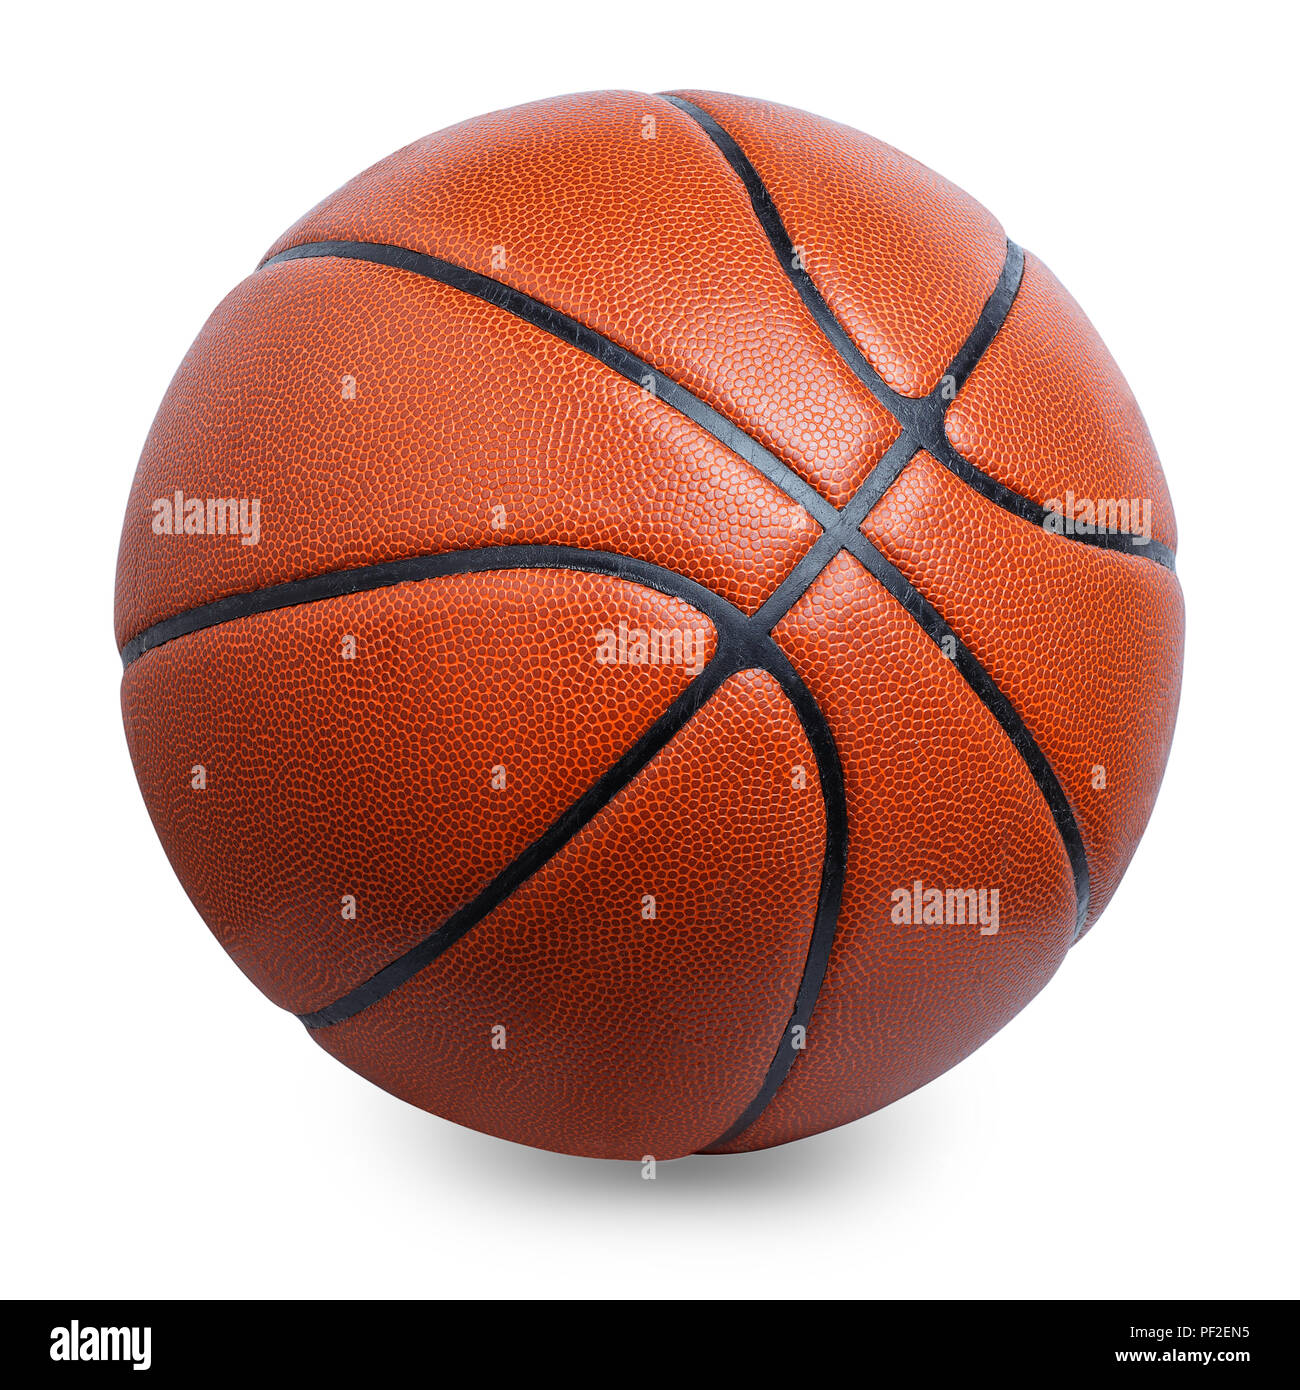 Basket-ball ball isolated on white Banque D'Images